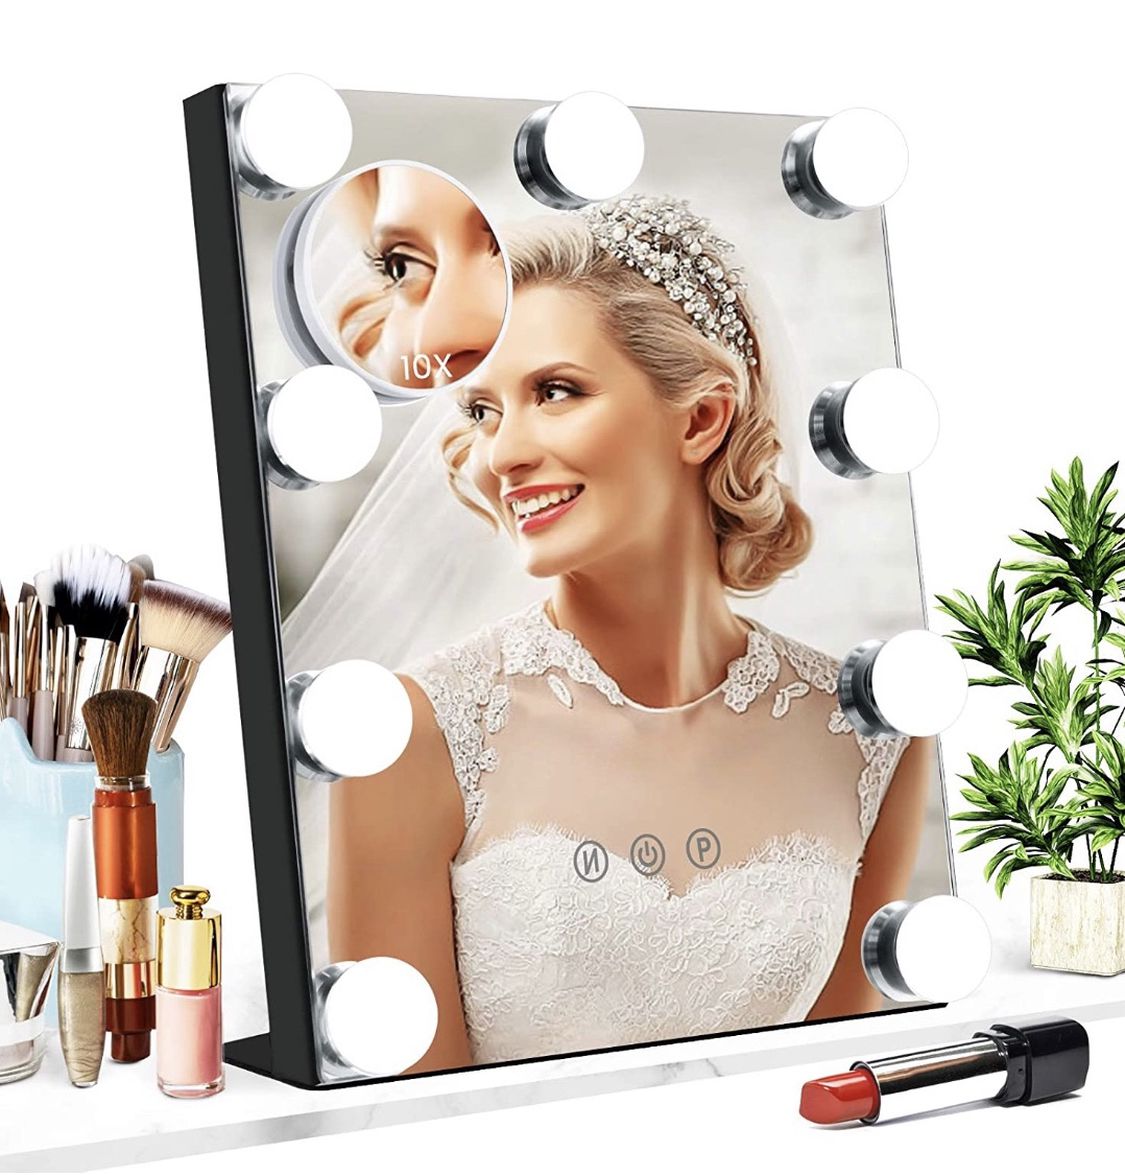 NEW! Vanity Mirror with Lights, Baban Hollywood Makeup Mirror with Dimmable LED with Lights 3 Colors Light Detachable 10X Magnification Touch Control